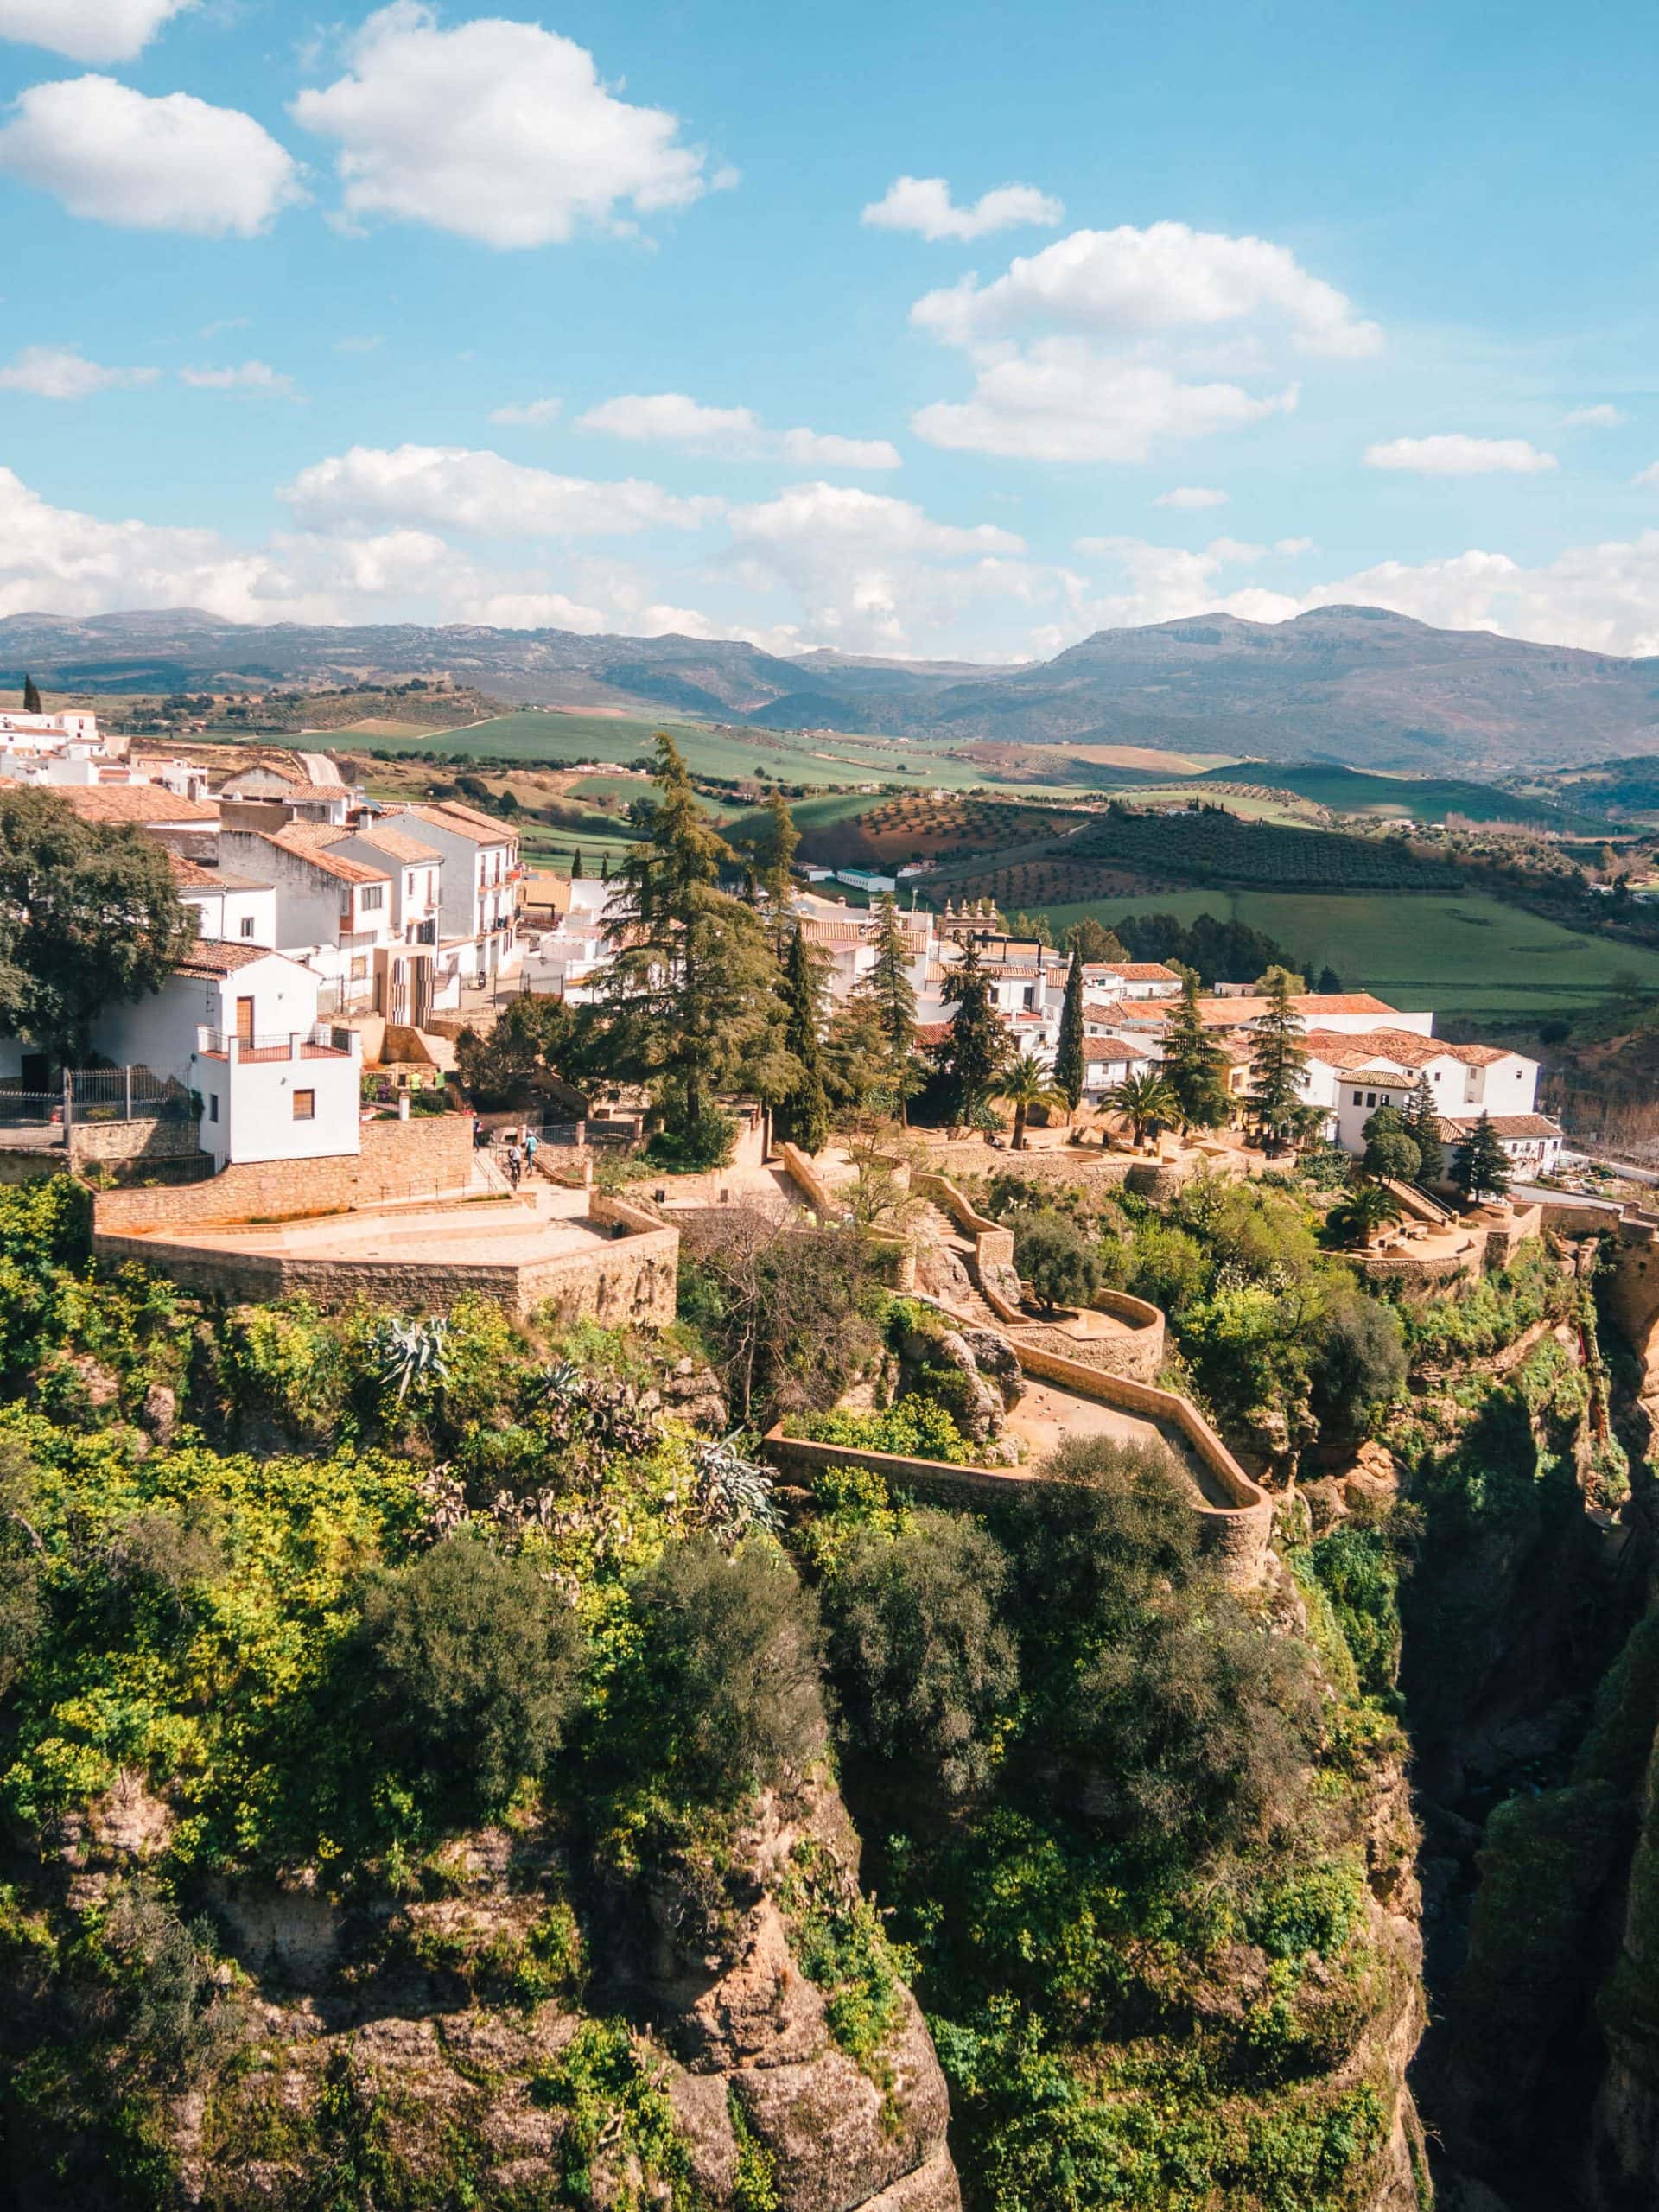 Jardines de Cuenca or the Cuenca Gardens - One of the best things to do in Ronda Spain in one day